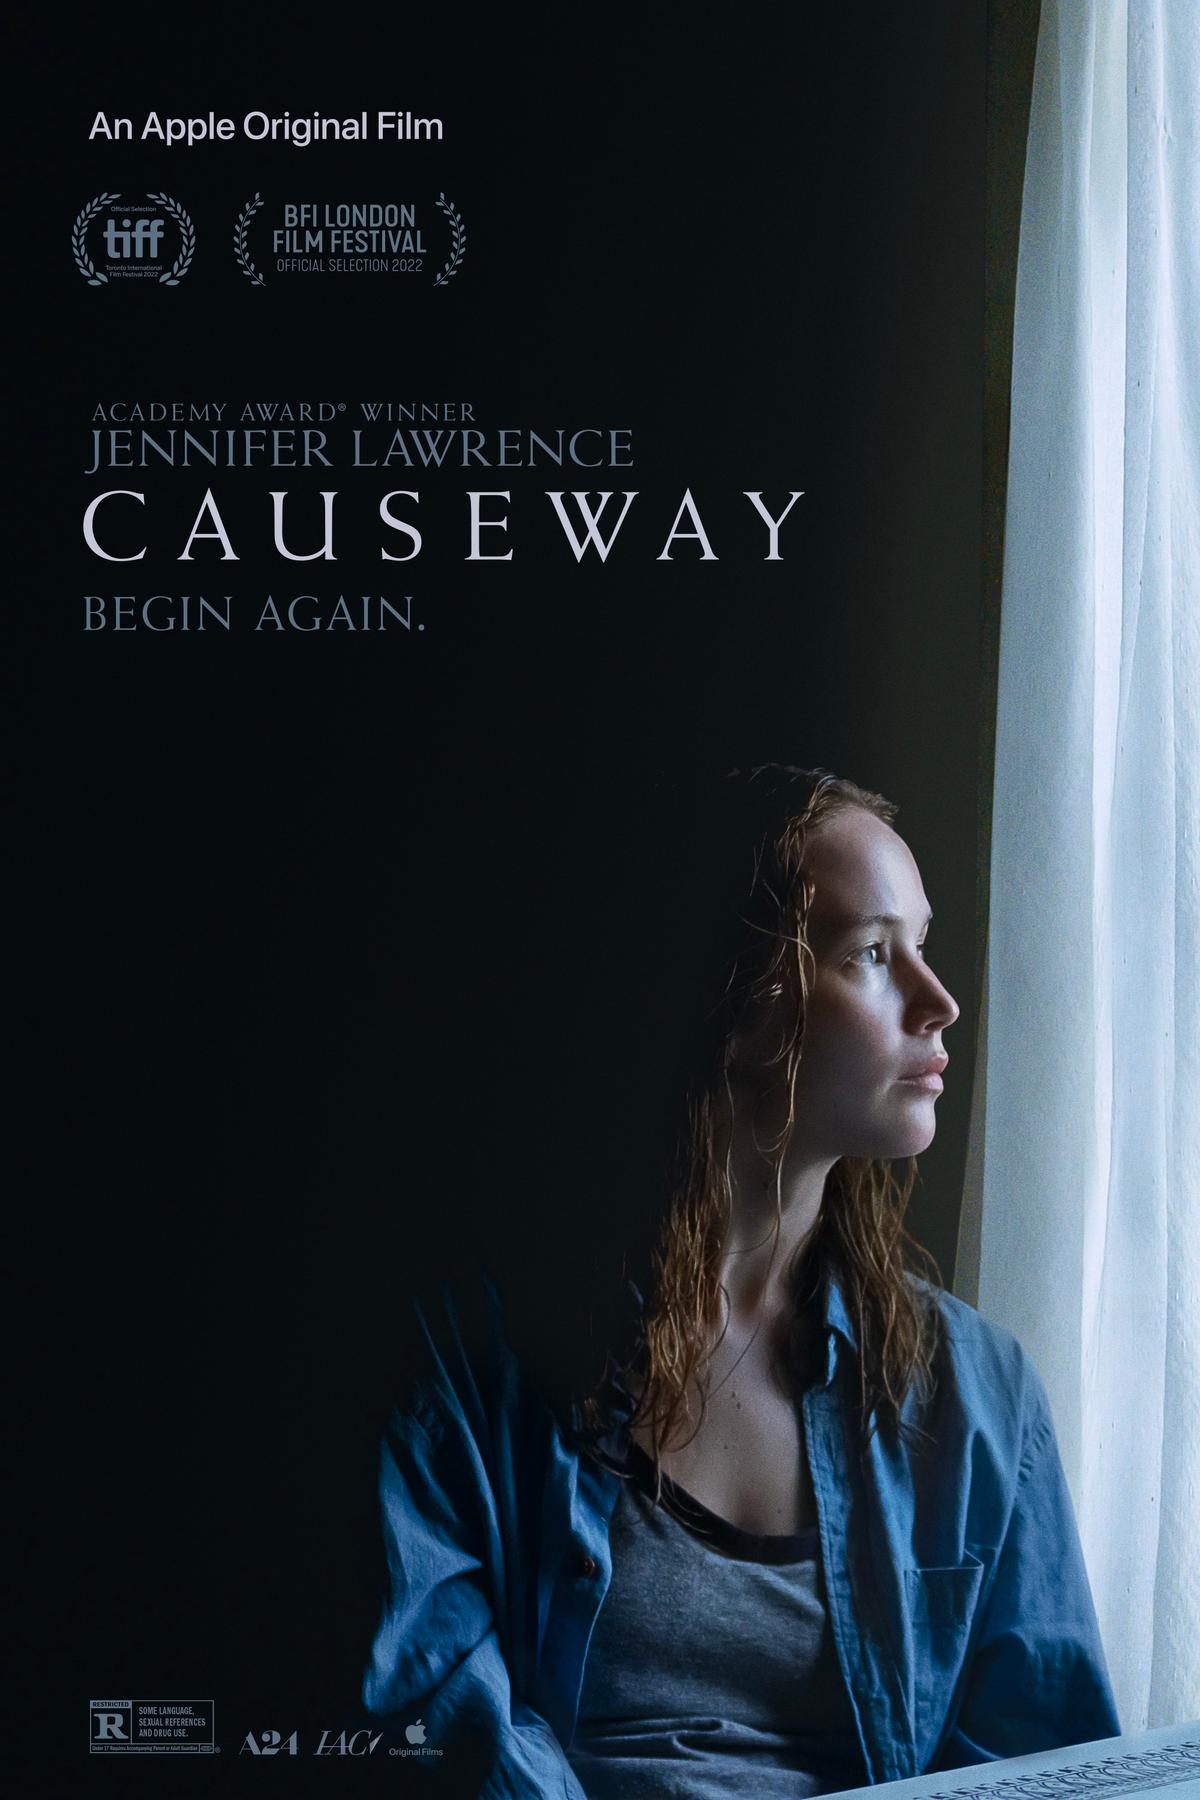 Promotional poster for "Causeway."